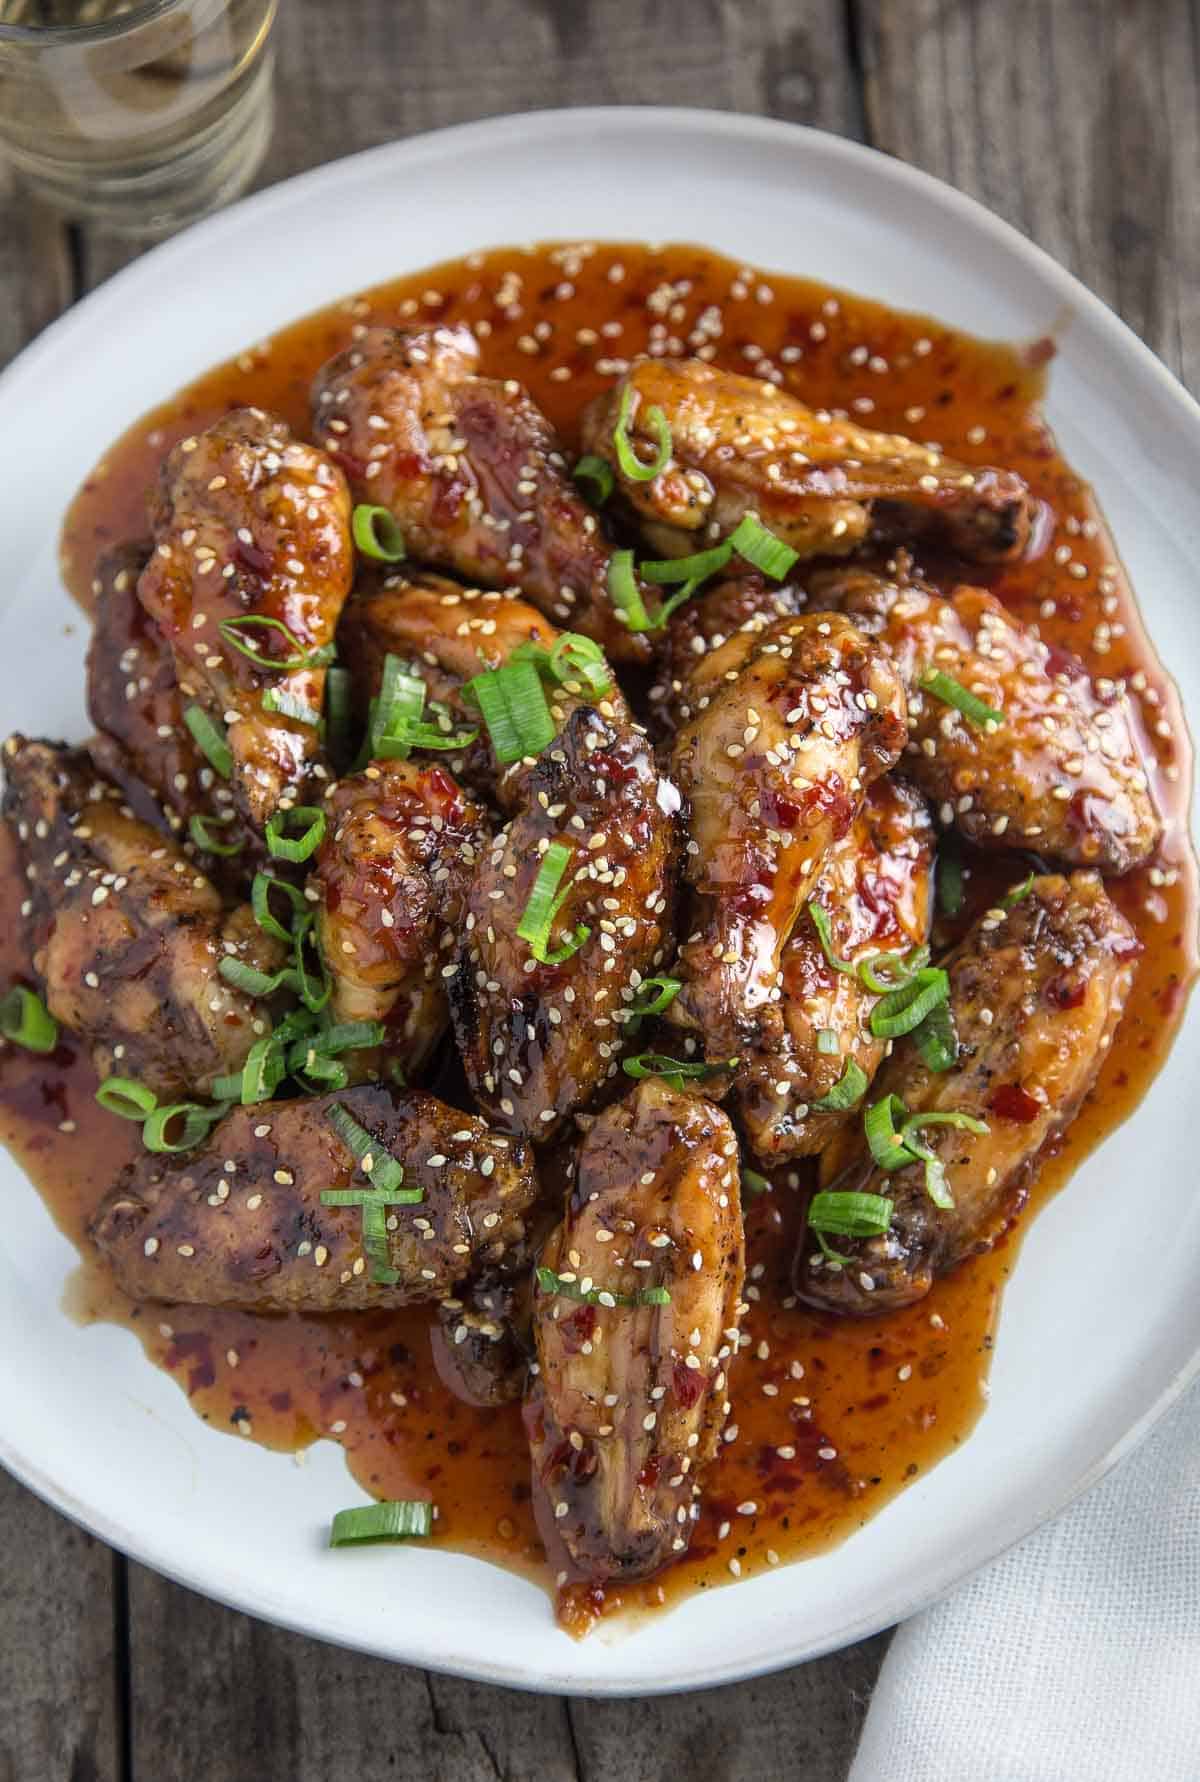 Smoked Chicken Wings with an Asian Thai Chili Sauce on a platter with a glass of wine